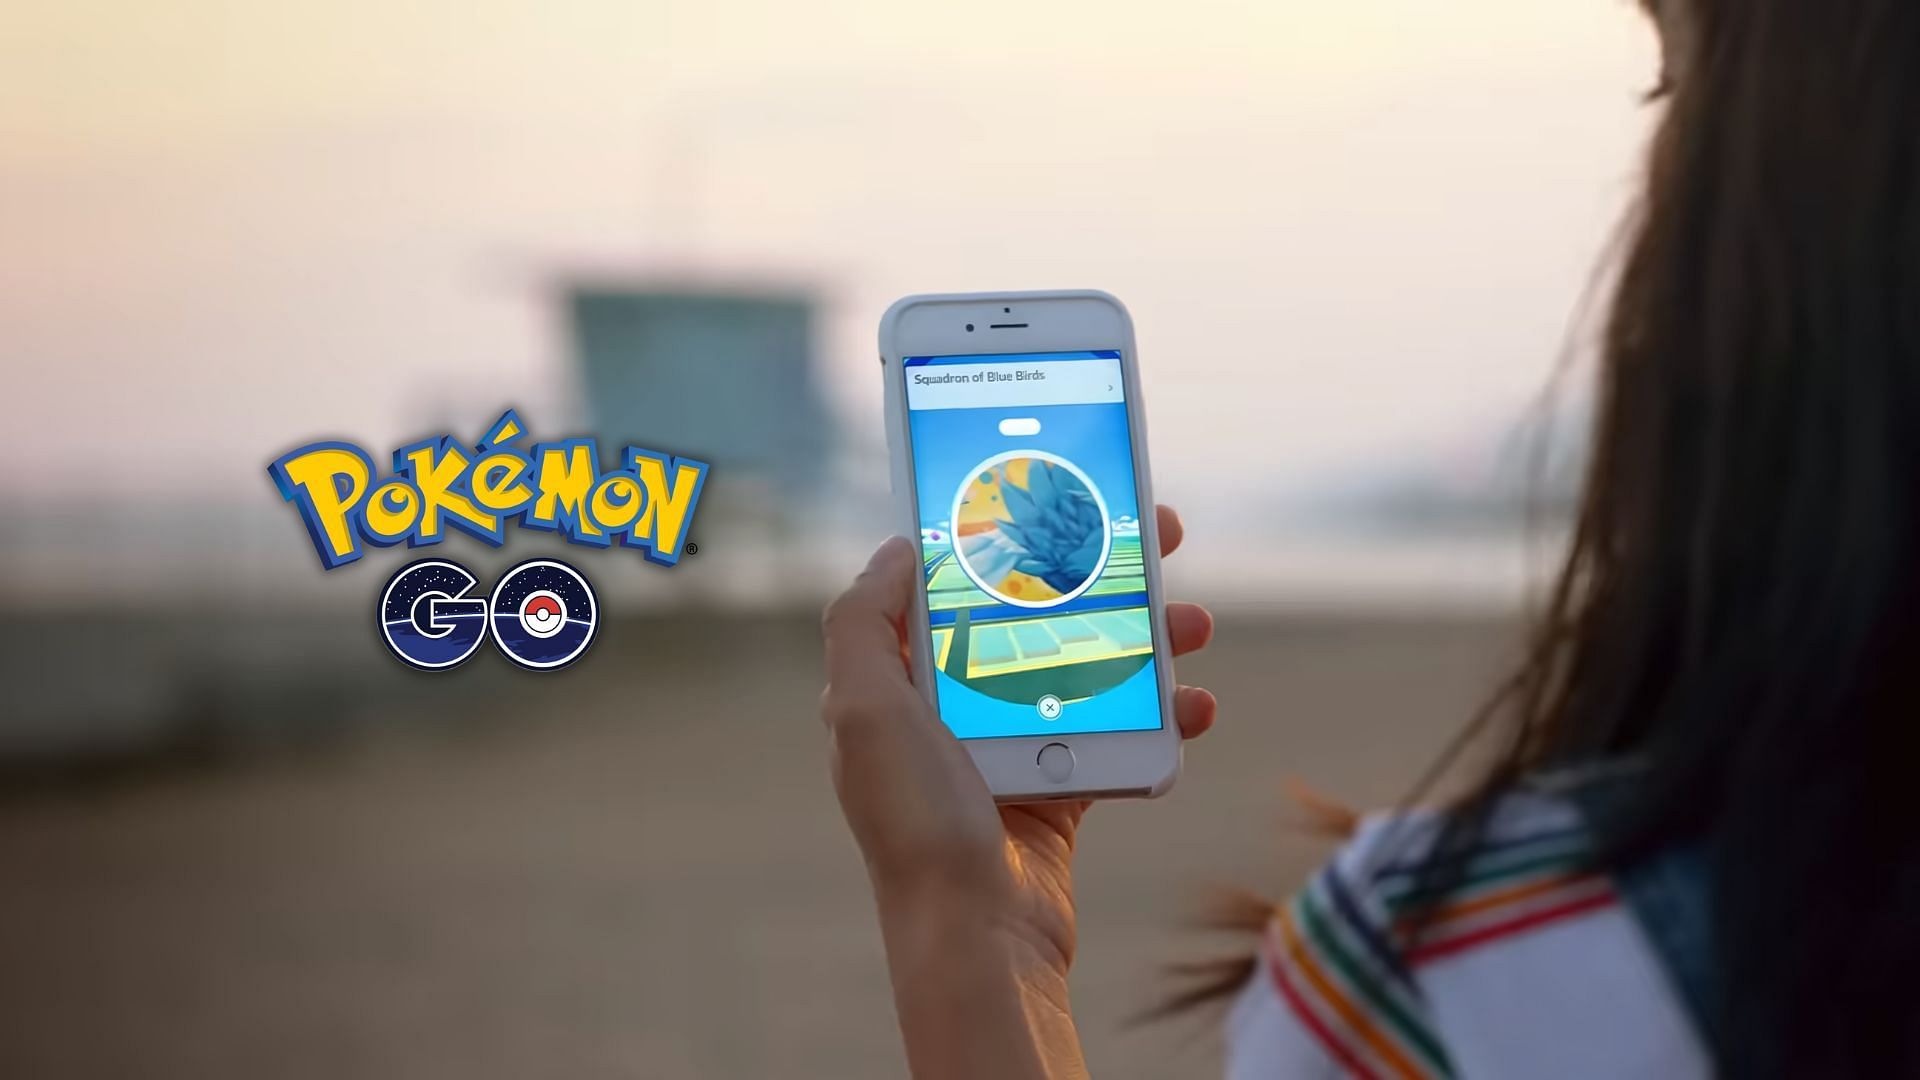 Opinion: Pokemon GO&rsquo;s anti-player practices increase the gulf between dev and community